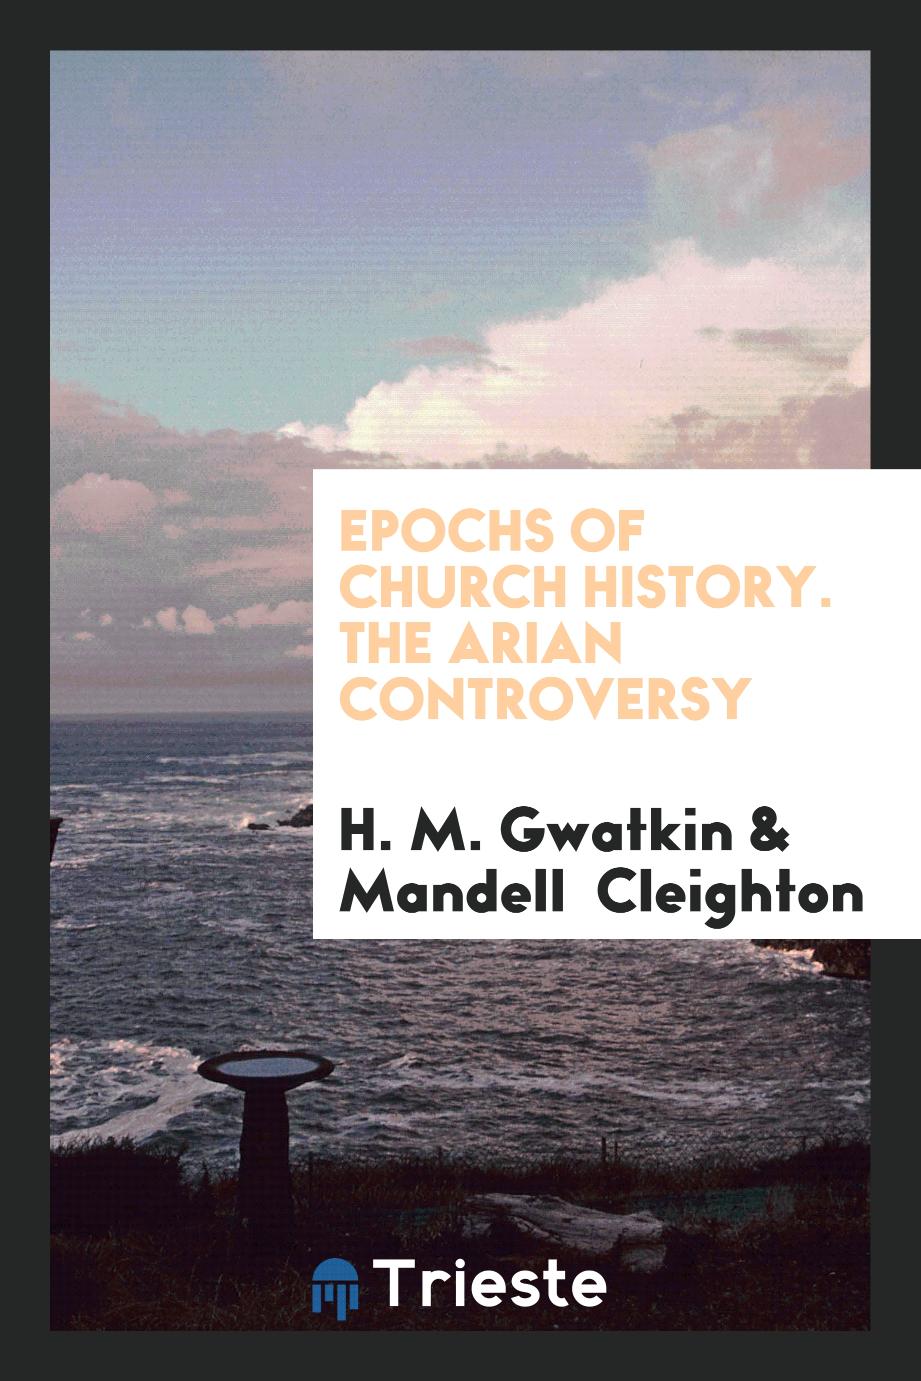 Epochs of Church History. The Arian Controversy